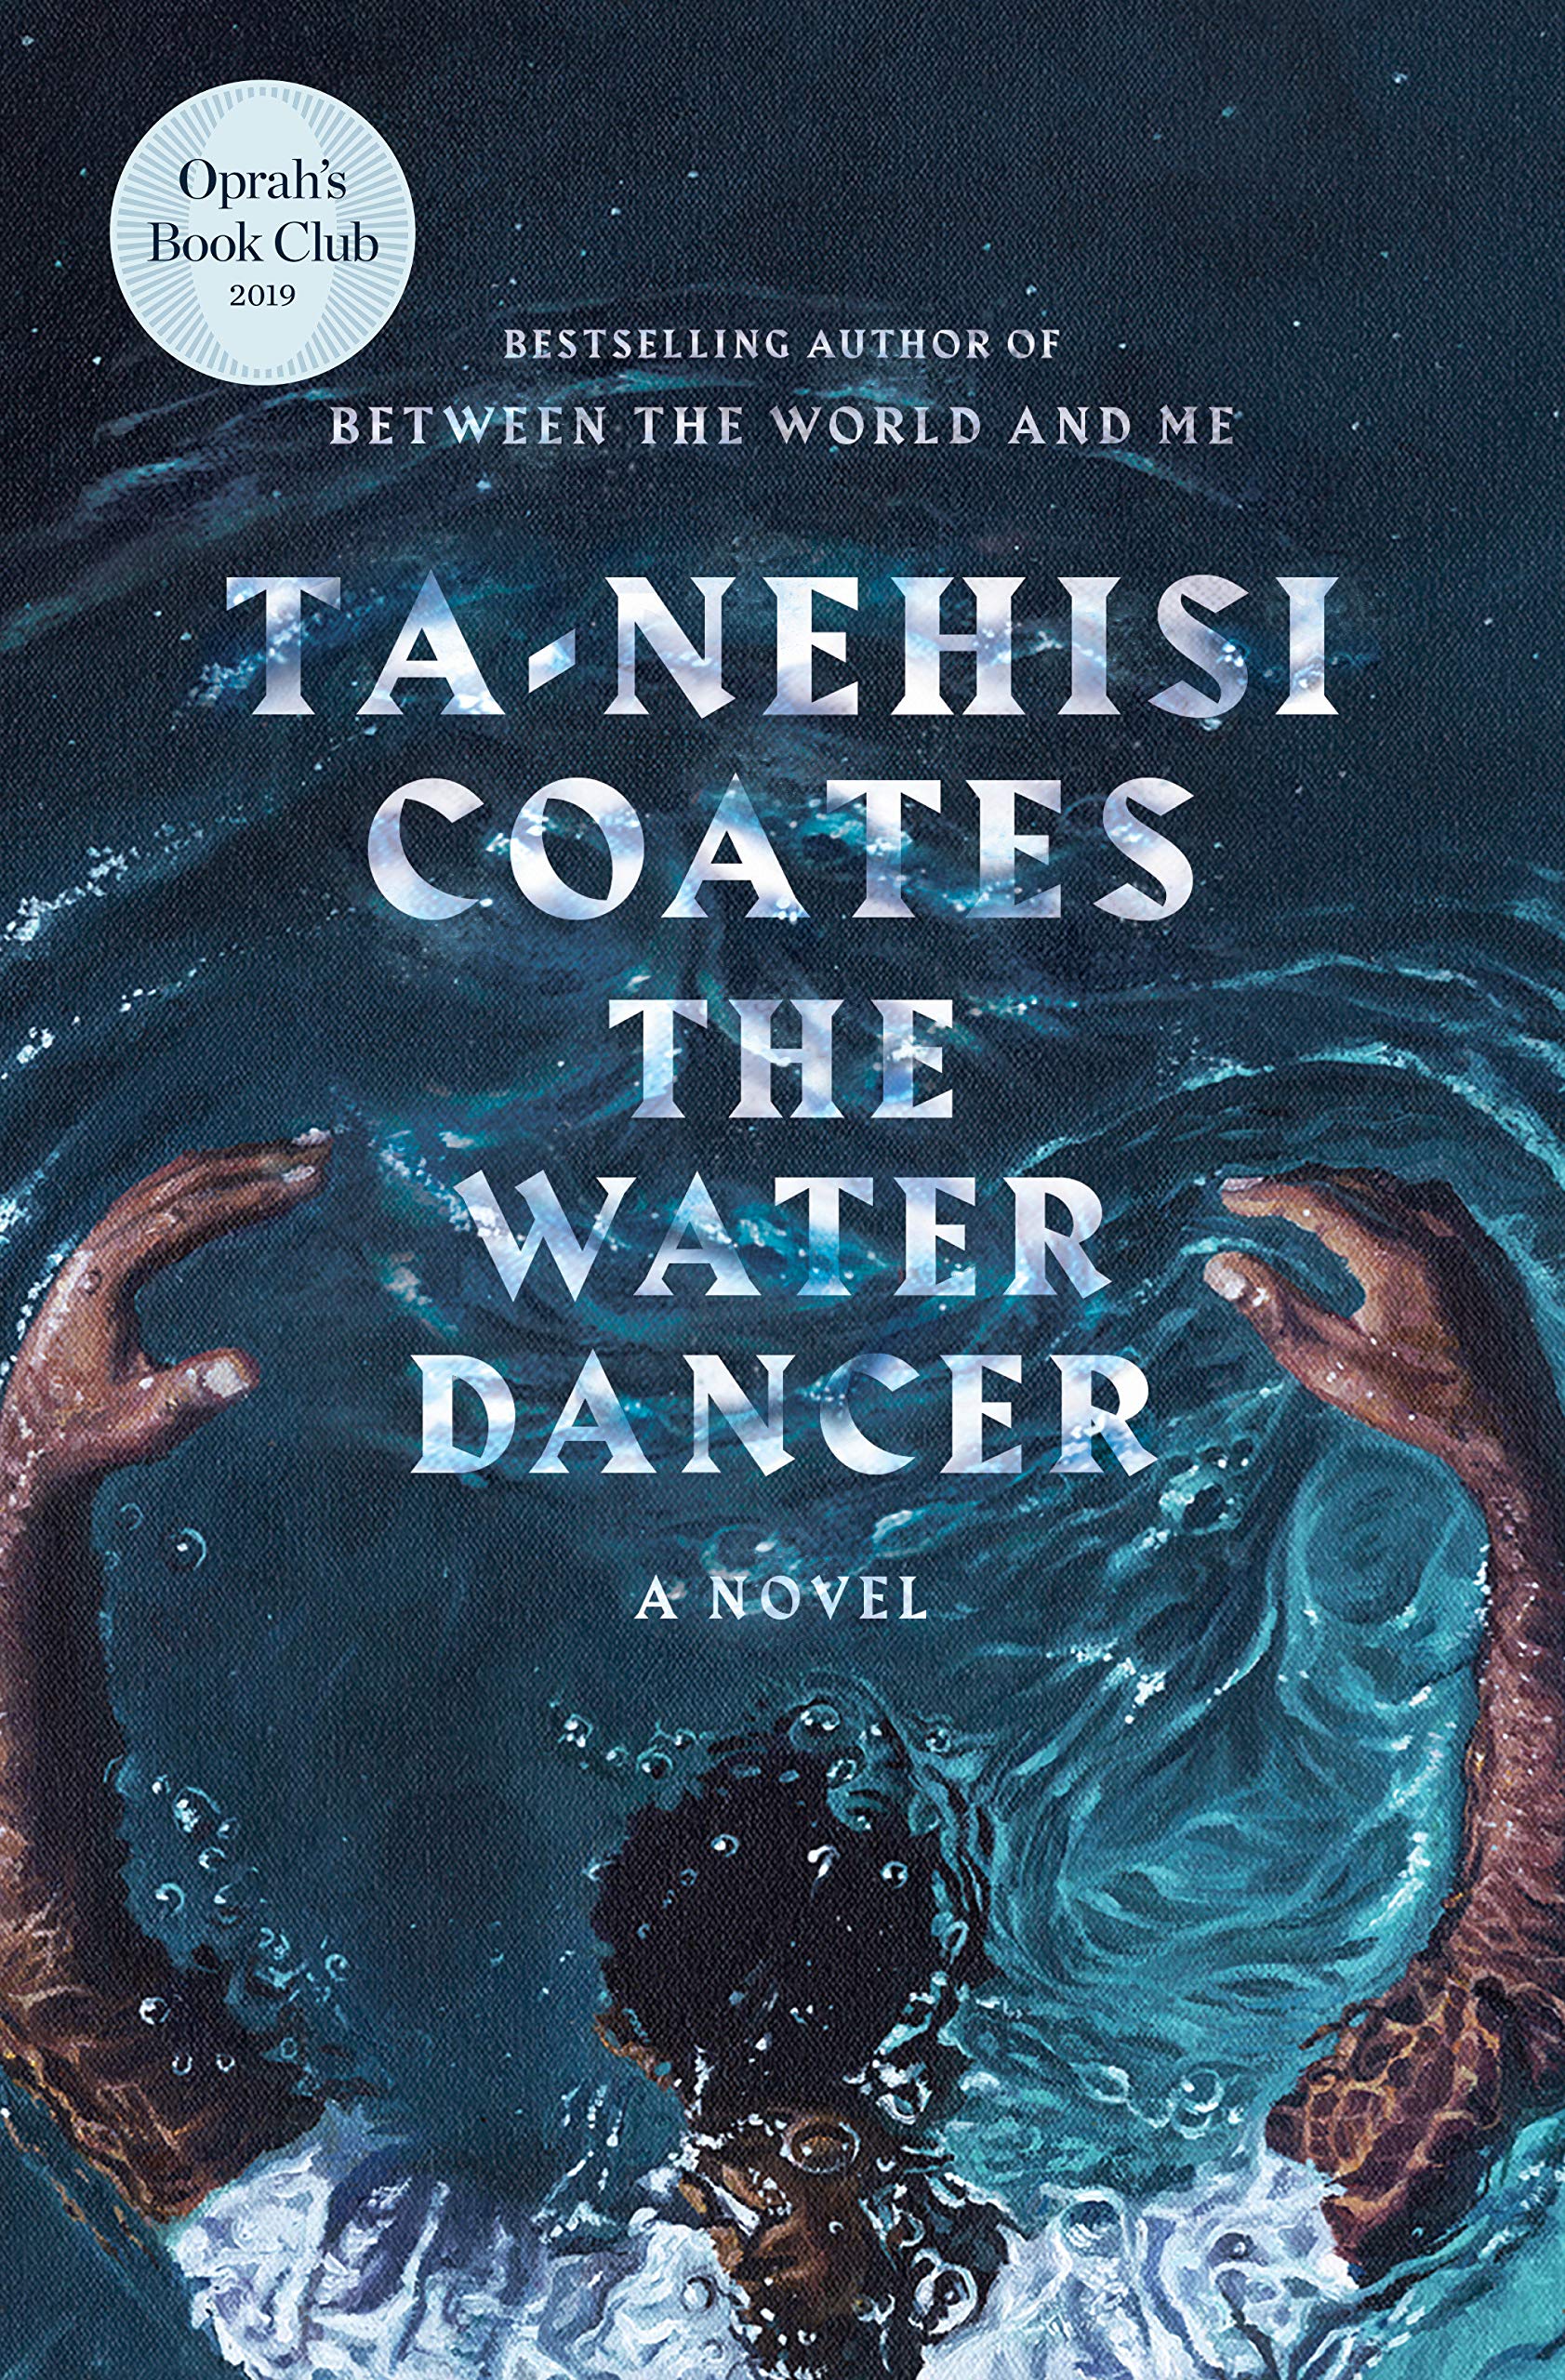 Image of the cover of the book The Water Dancer by Ta-Nehisi Coates